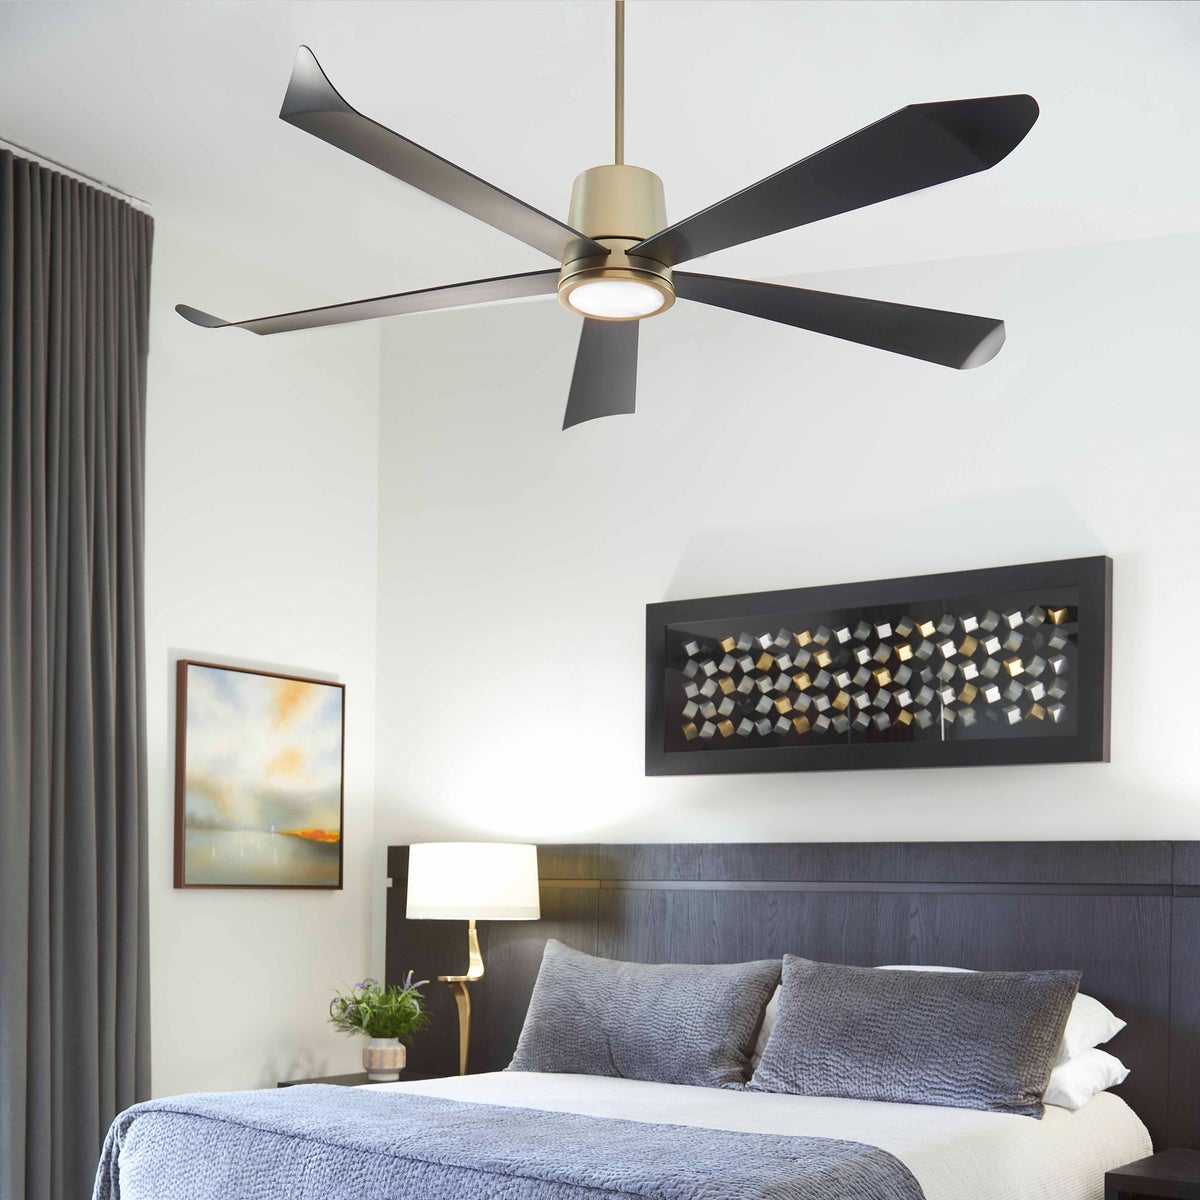 A smart ceiling fan with elongated blades and optional light kits. Perfect for living rooms, home offices, or bedrooms. Brand: Quorum International. Motor Size: DC-165NM. Watts: 26/19/15/11/8/5. Amps: .30/.24/.20/.15/.11/.08. RPMs: 90/82/74/60/59/52. Number of Blades: 5. Blade Pitch: 13 Degrees. Certifications: UL Listed. Safety Rating: Damp Location. Finish: Aged Brass, Matte Black, Satin Nickel, Studio White. Dimensions: 15"H x 72"W. Warranty: Limited Lifetime.